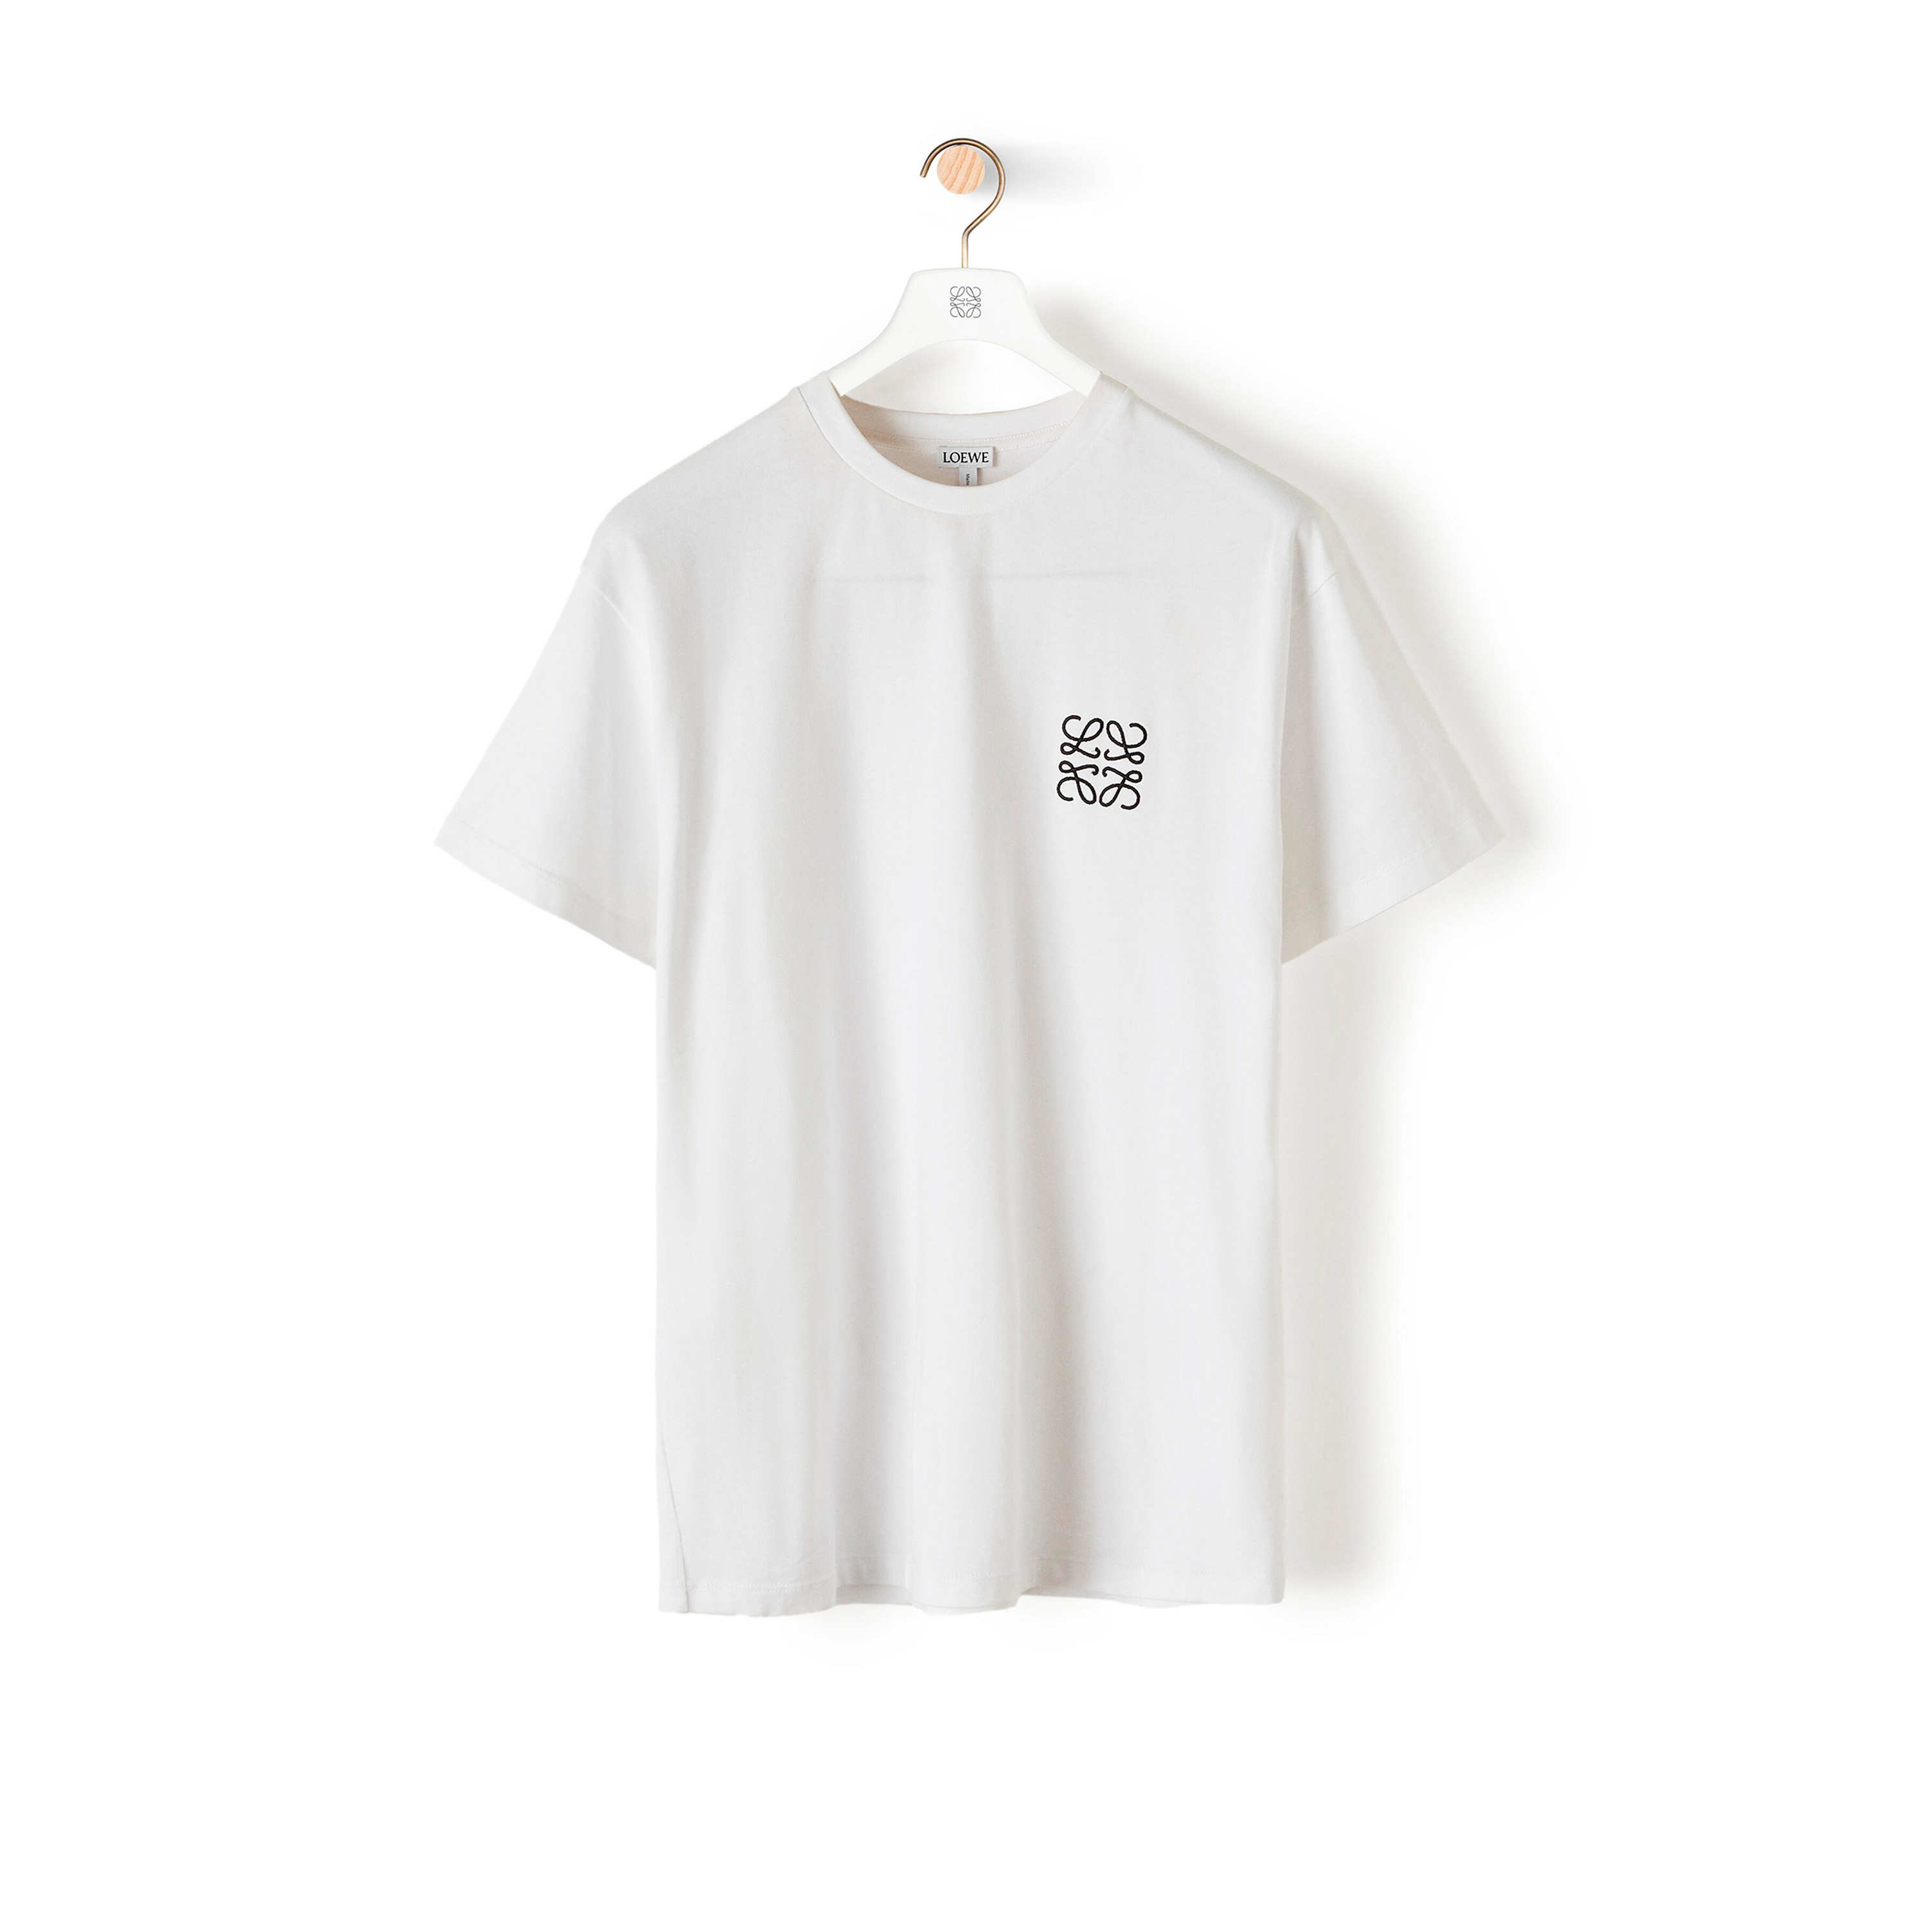 FW22 Men's collection anagram t-shirt